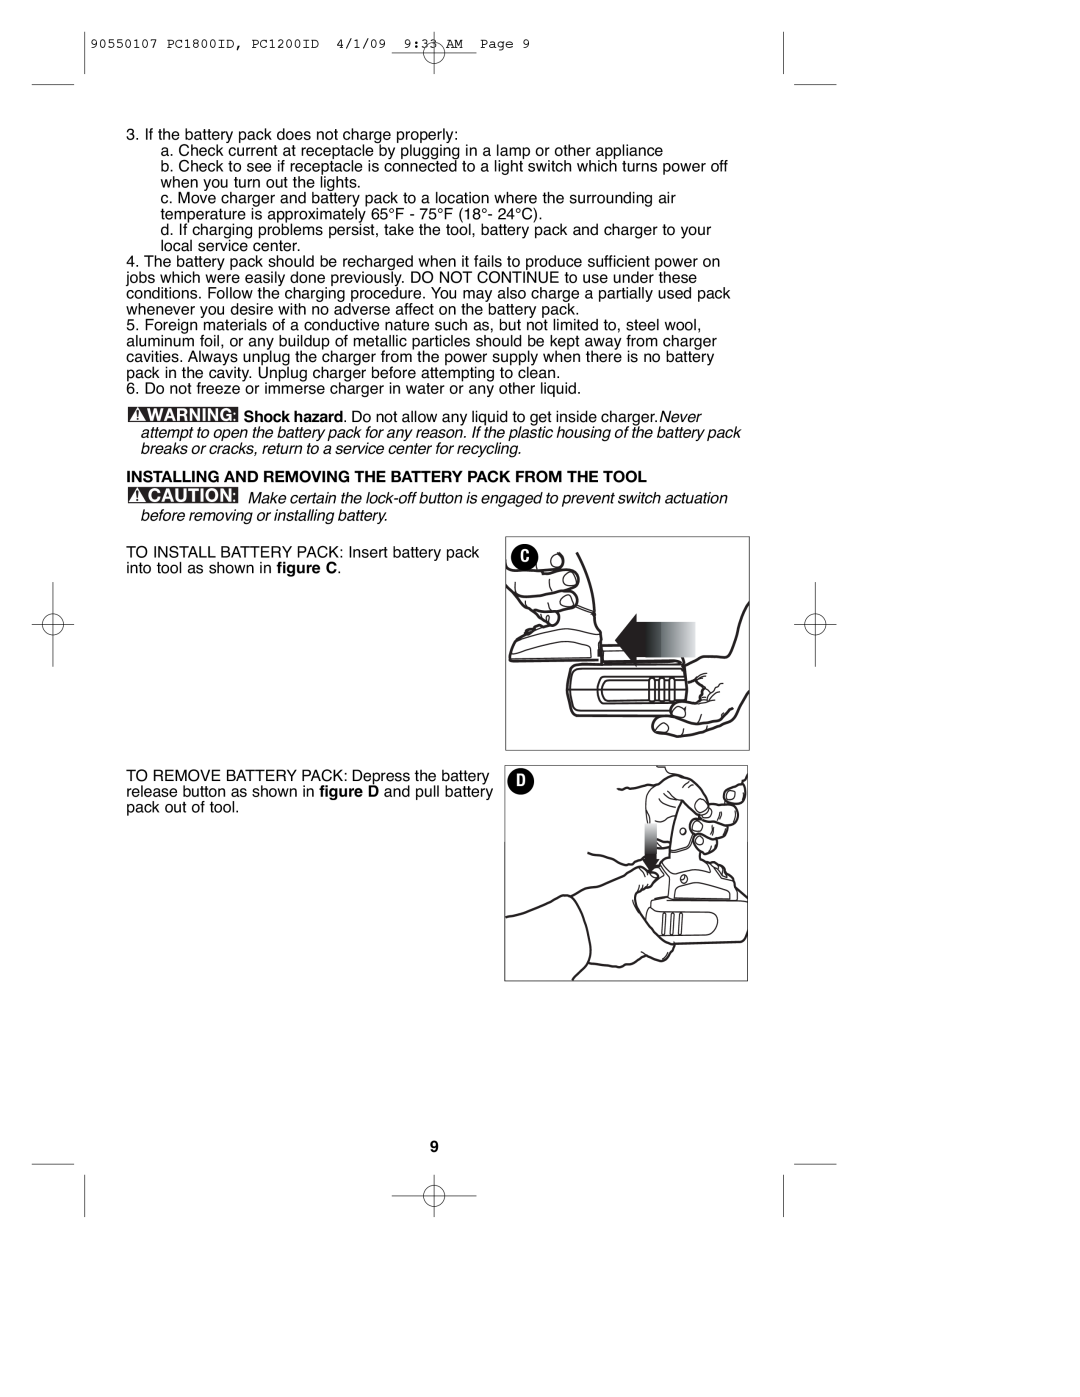 Porter-Cable PC1800ID, PCL180ID, 90550107, PC1200ID instruction manual Installing And Removing The Battery Pack From The Tool 